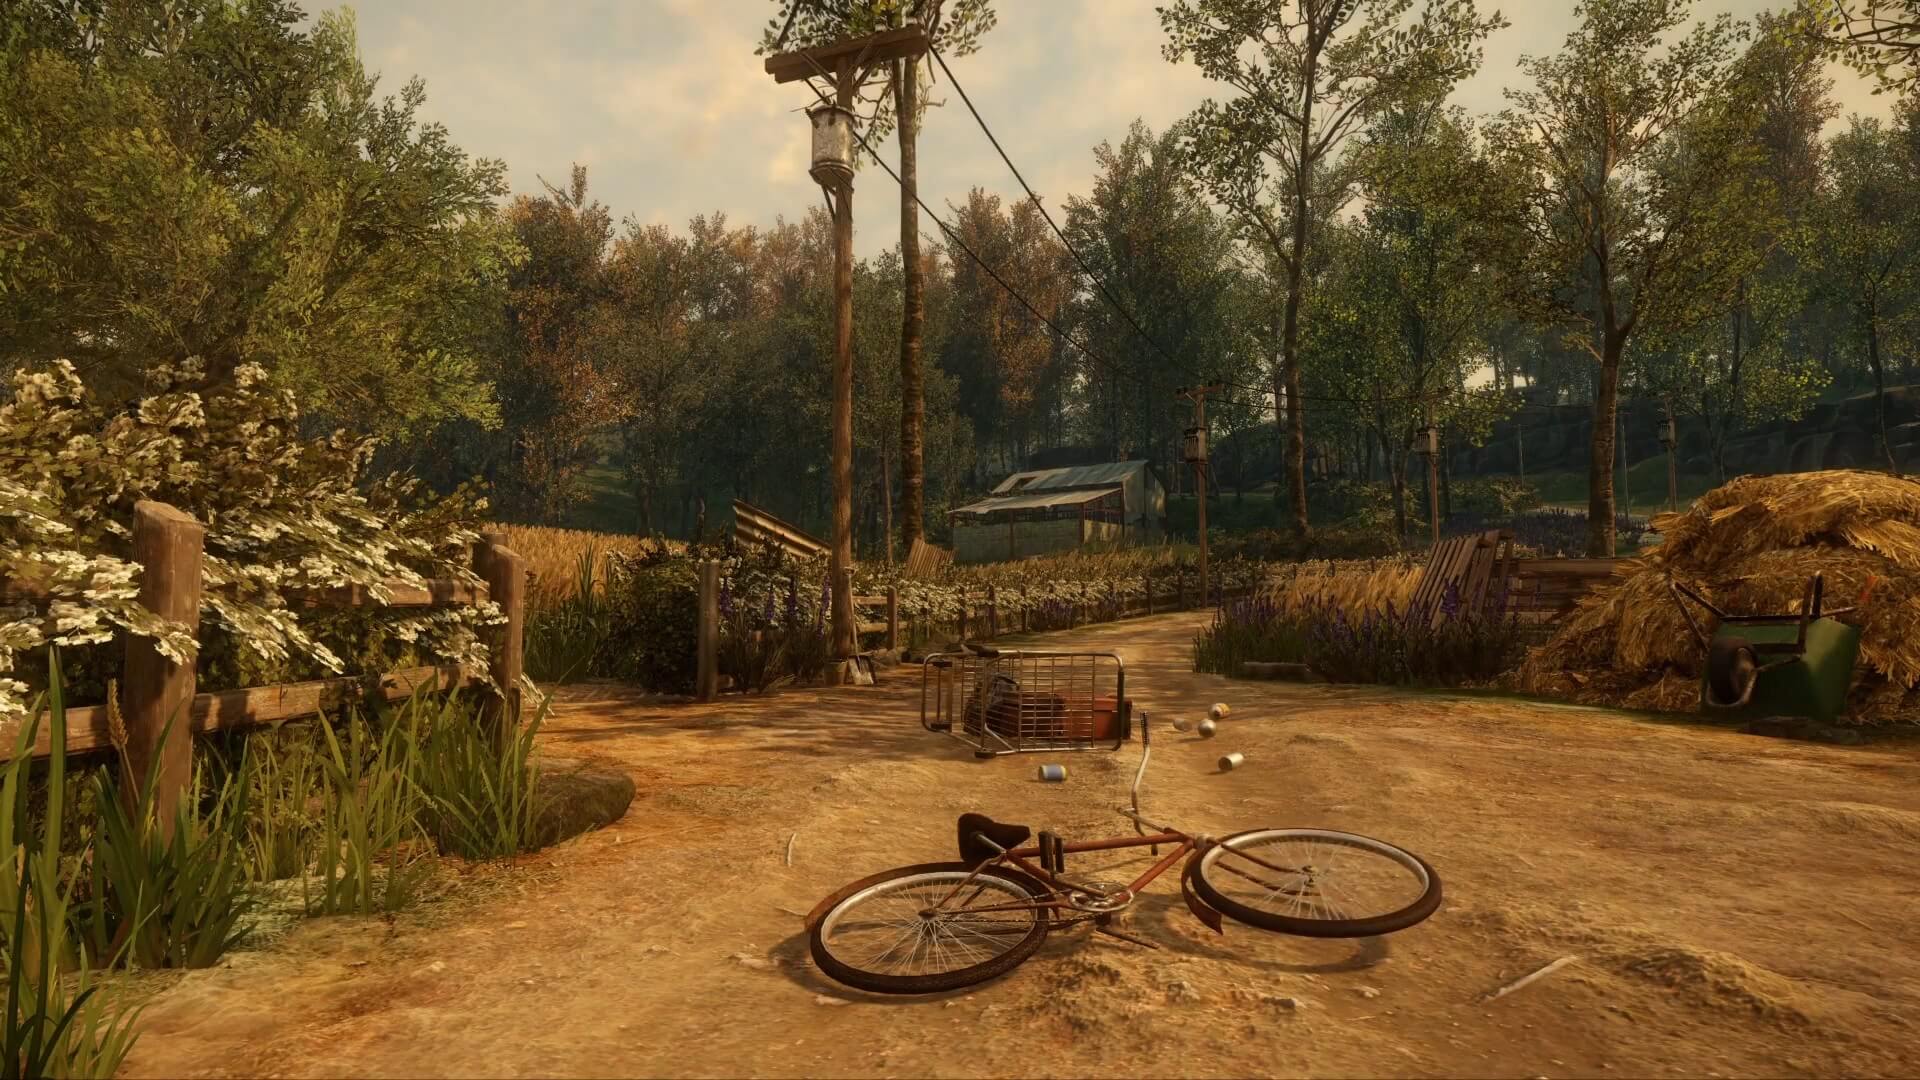 CryEngine-powered-Everybodys-Gone-to-the-Rapture-E3-trailer-screenshots-reveal-a-lonely-post-apocalyptic-world